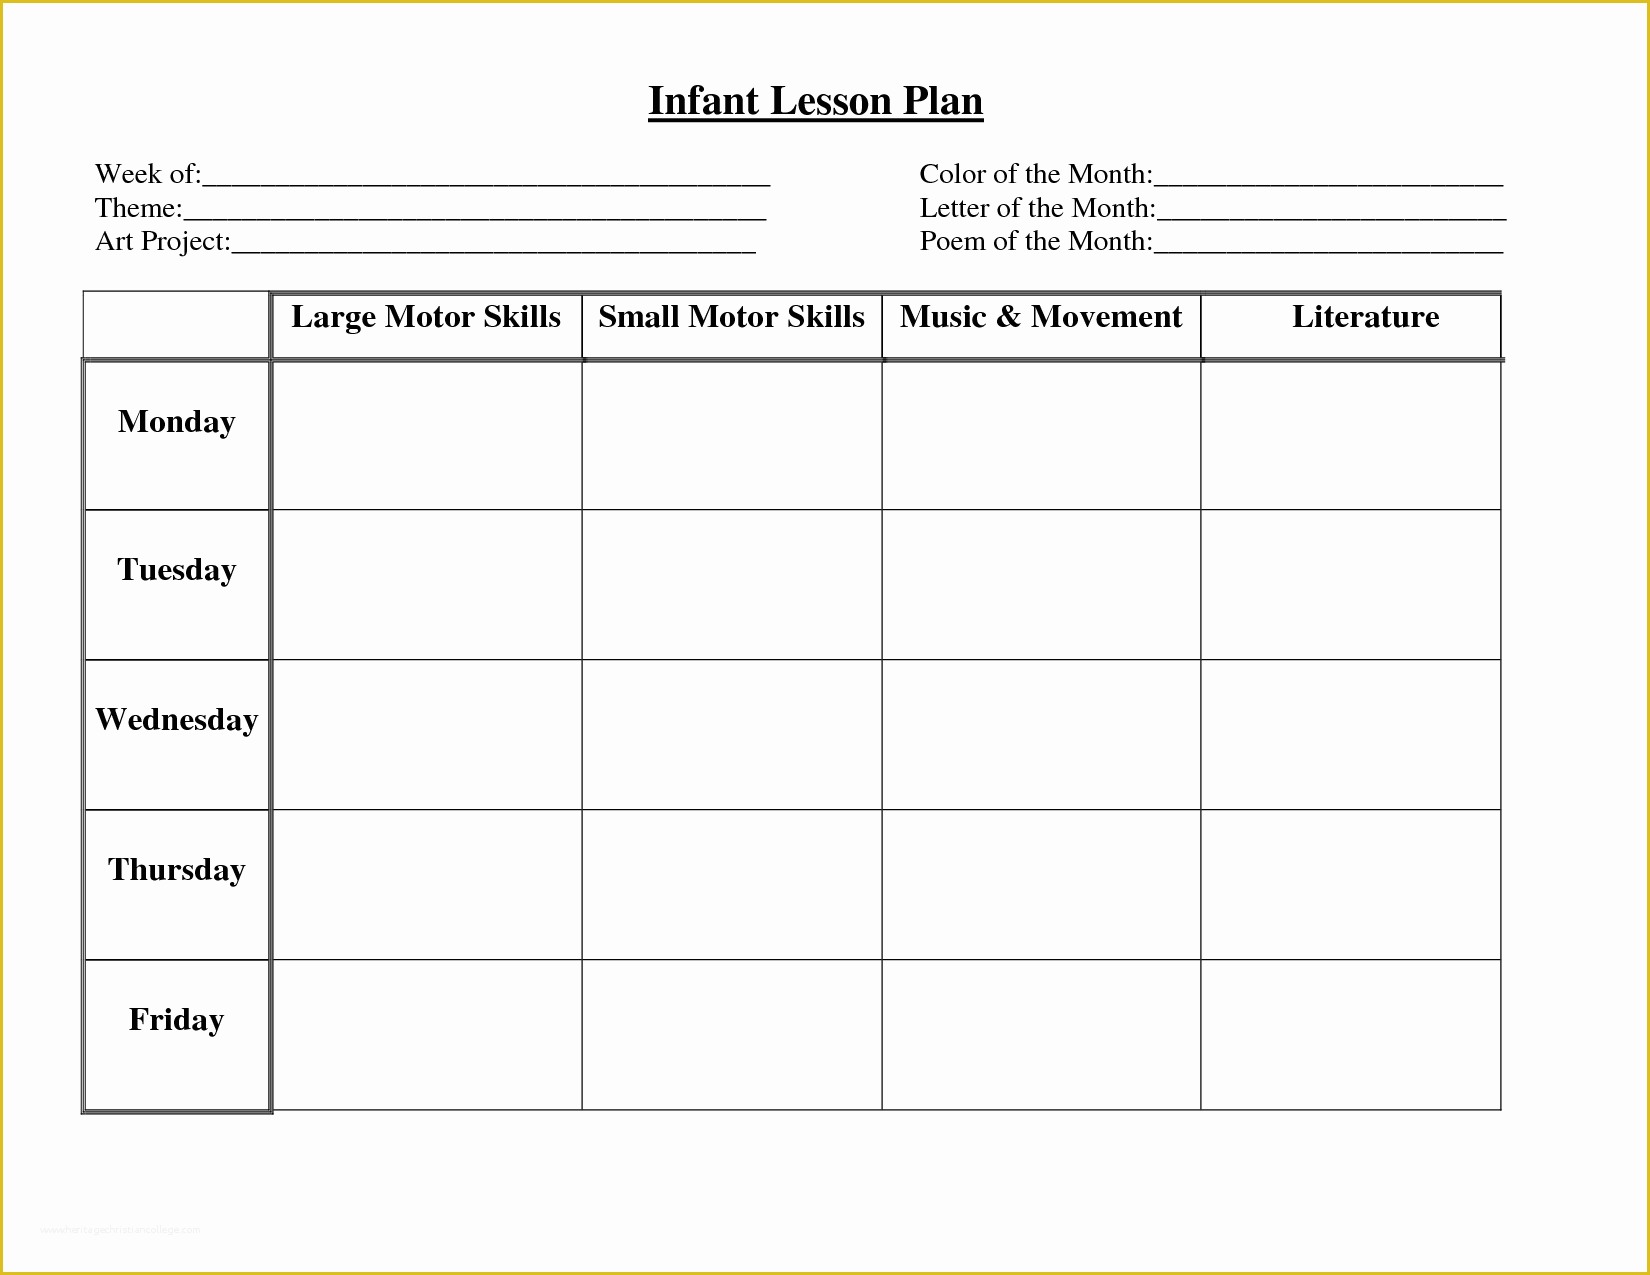 Free Printable Lesson Plan Template Blank Of Infant Blank Lesson Plan Sheets